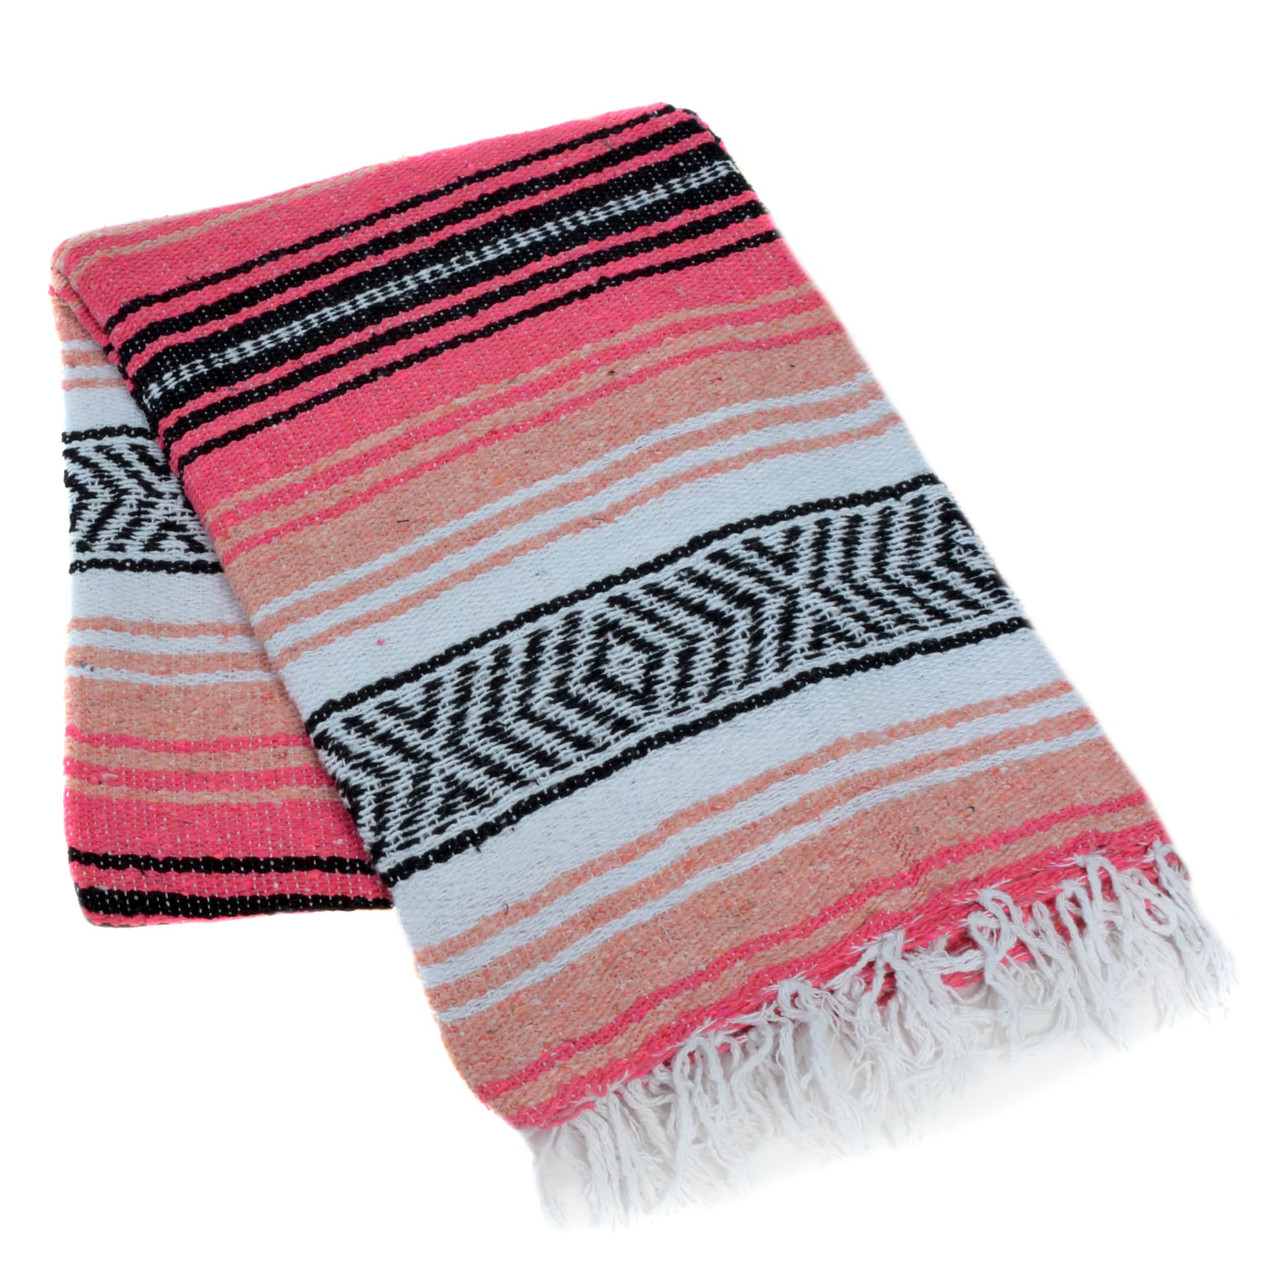 Classic Mexican Yoga Blankets by La Montana (74 x 53)